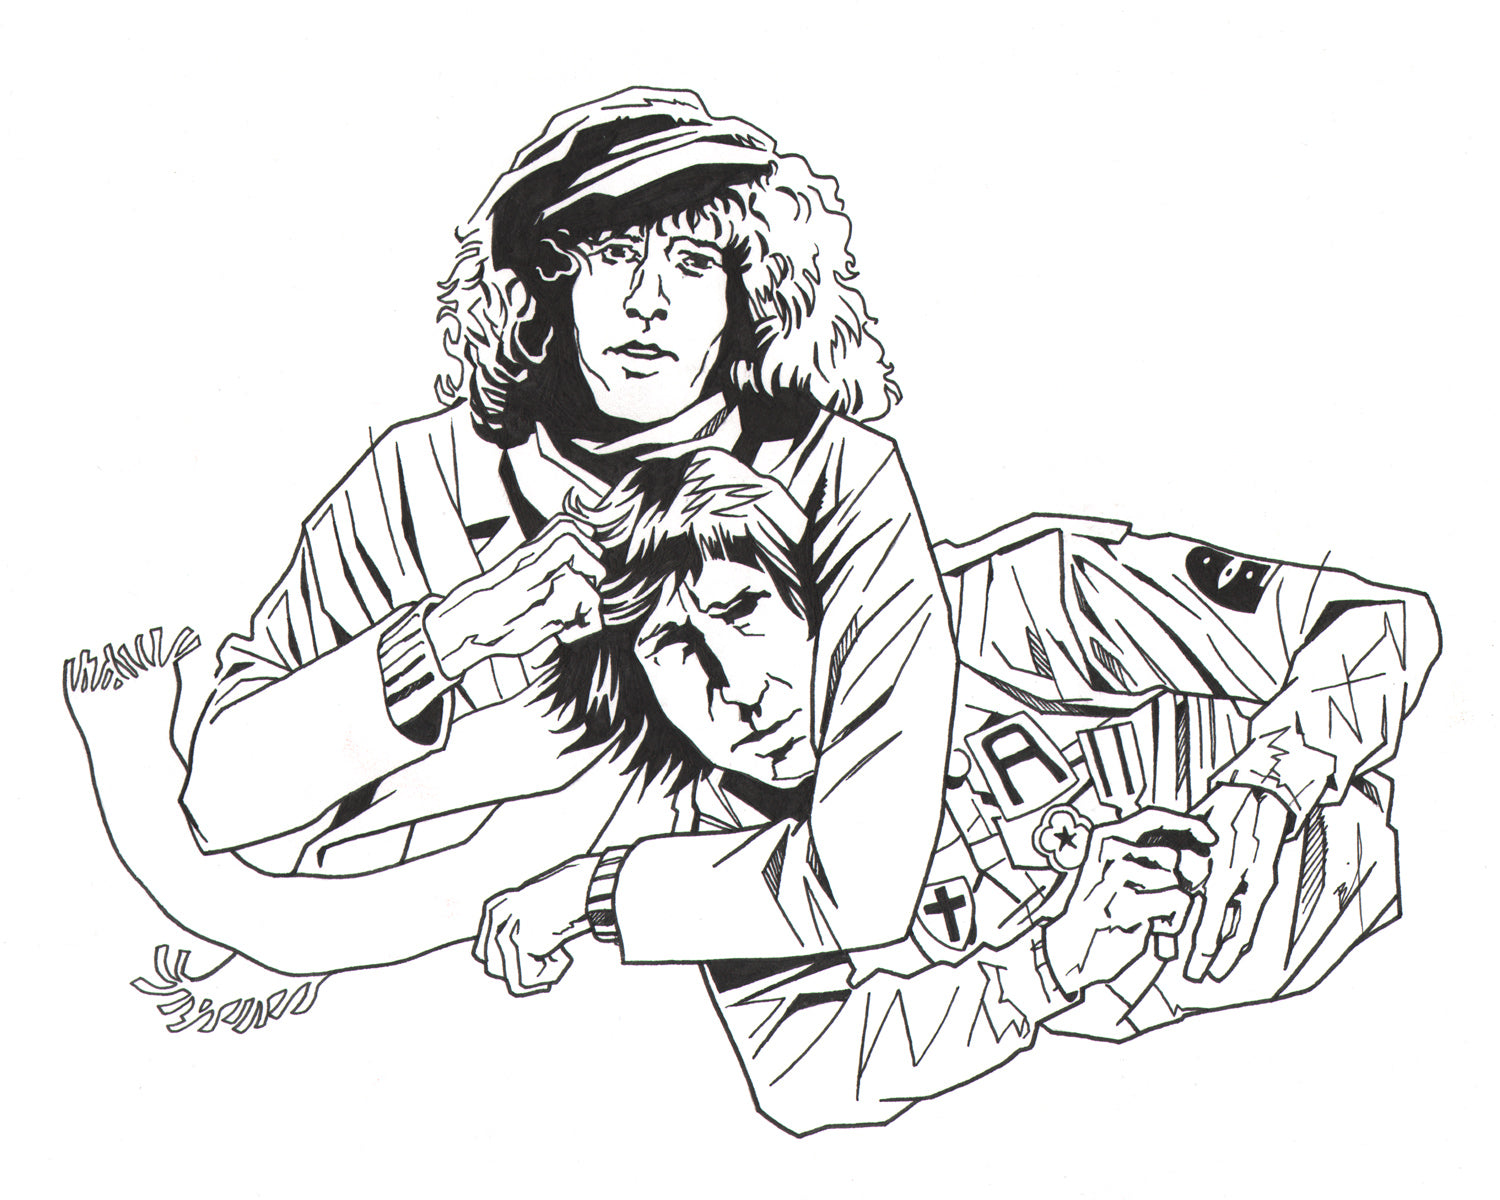 Roger Daltrey giving Pete Townshend a noogie ink drawing